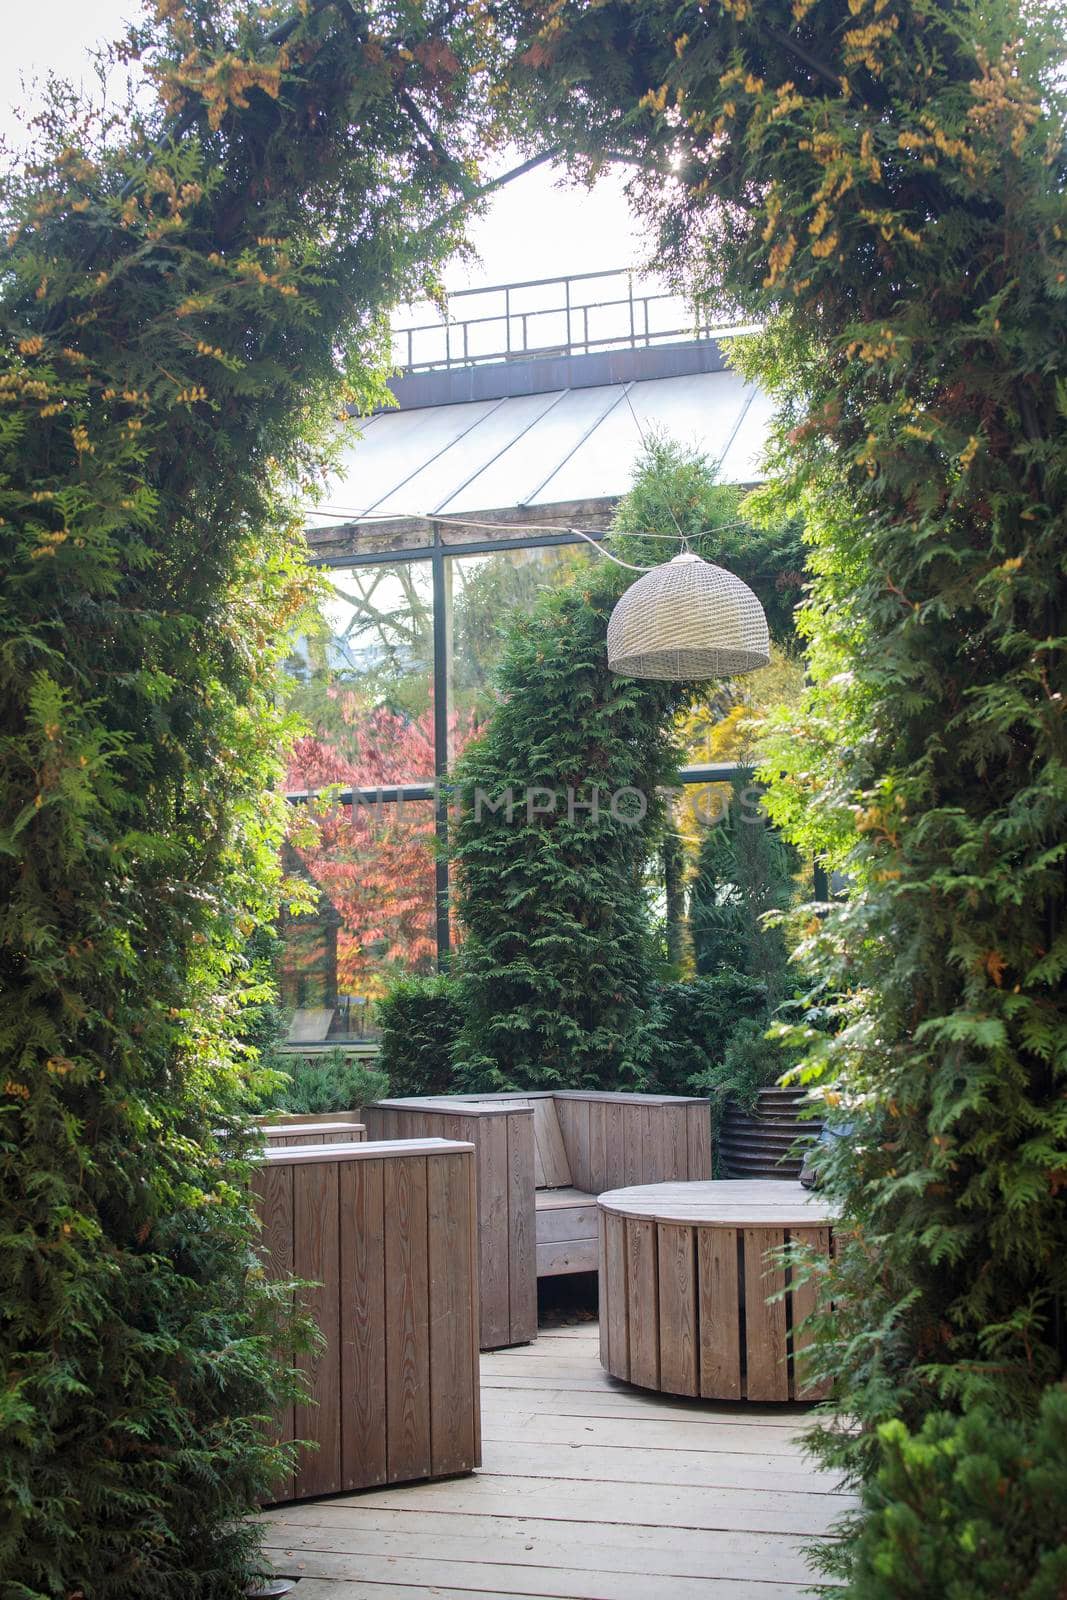 Gazebo in the garden. Arch of thuja branches. Wooden modern chairs and table. Shade.